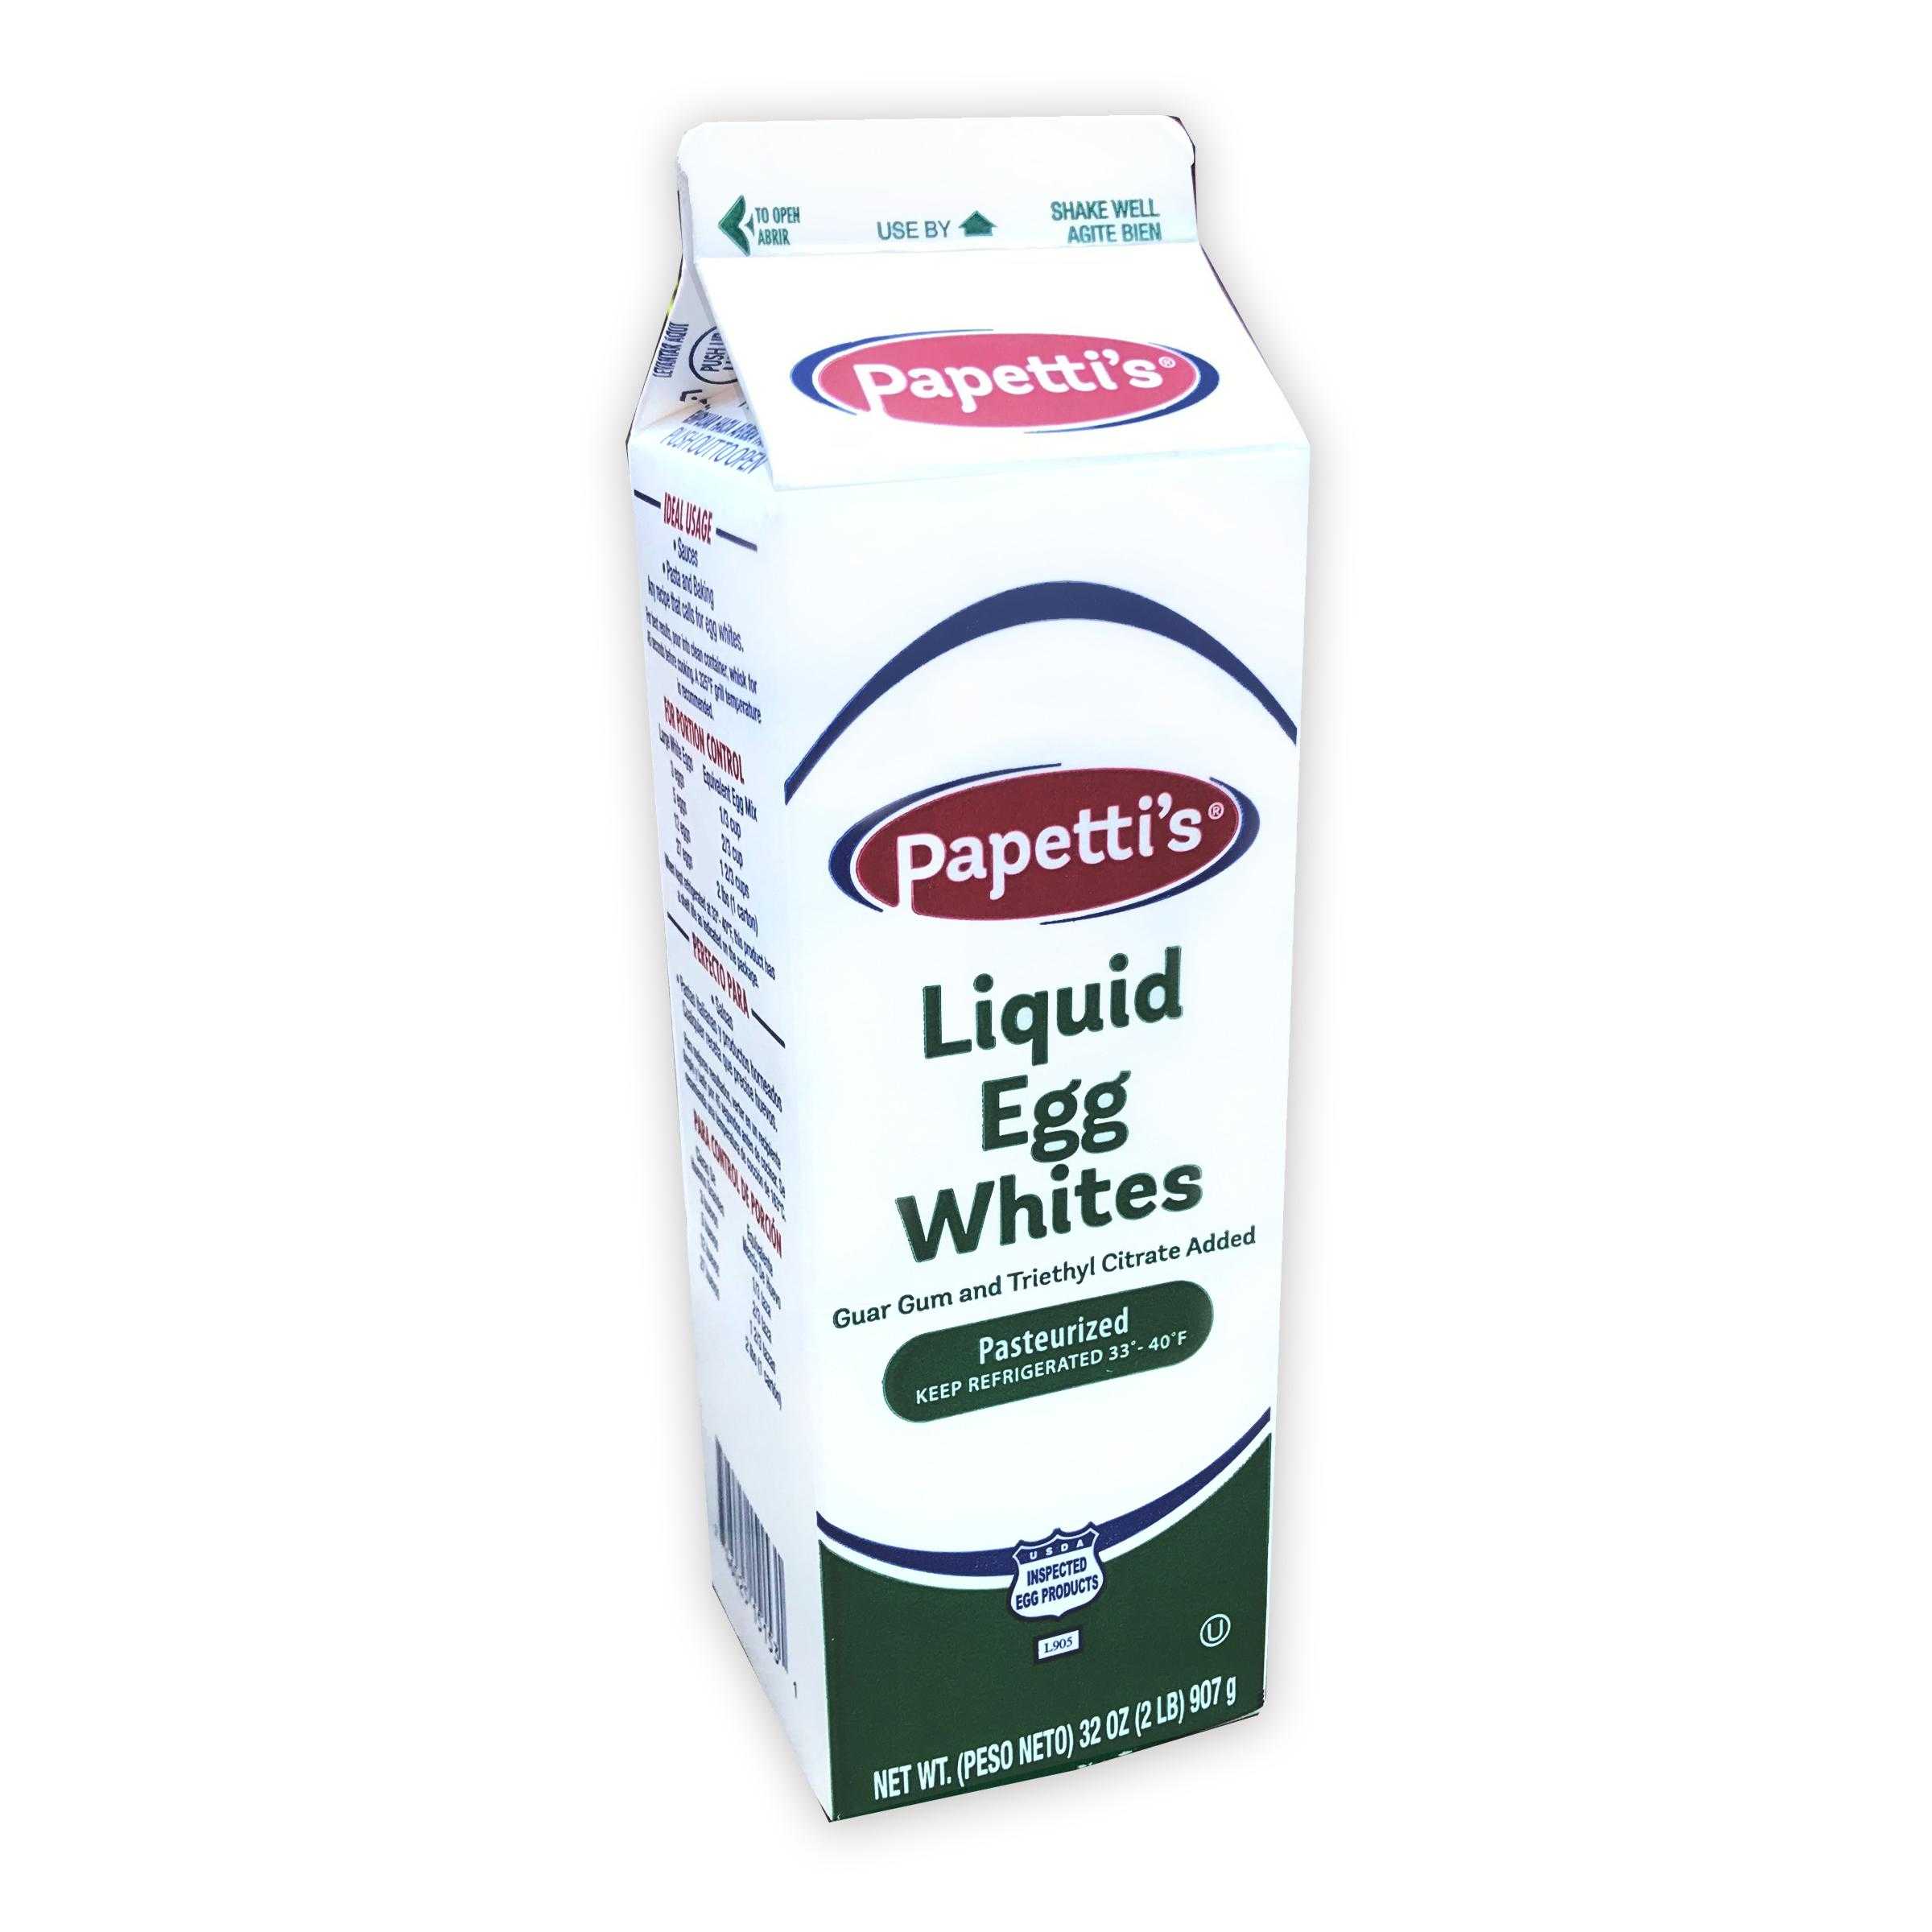 Papetti’s® Refrigerated Liquid Egg Whites with Triethyl Citrate and Guar Gum, 15/2 Lb Cartons